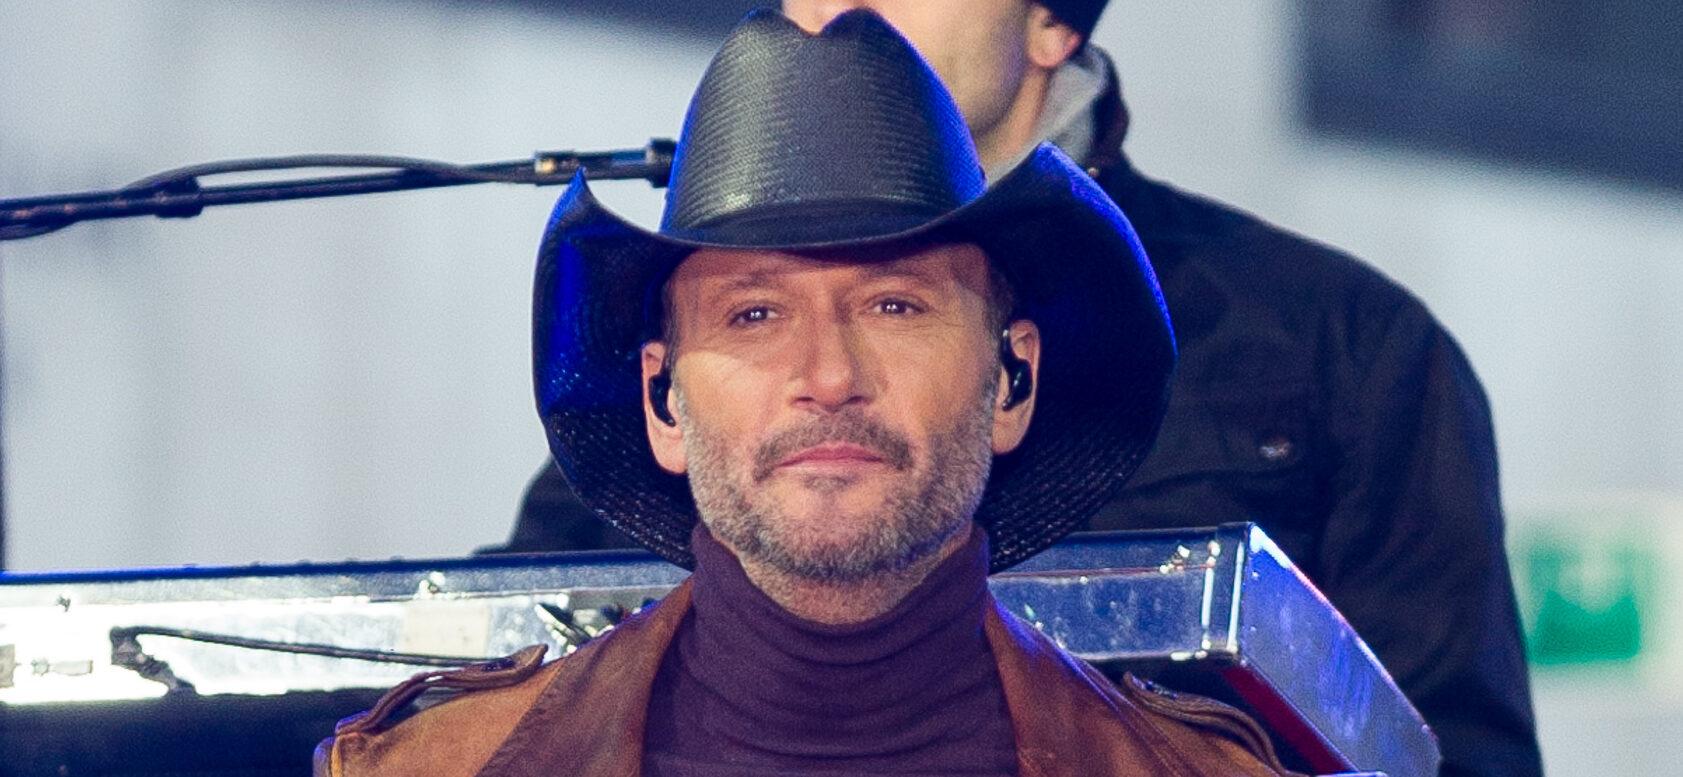 Tim McGraw Shares Heartwarming Birthday Tribute To Wife Faith Hill